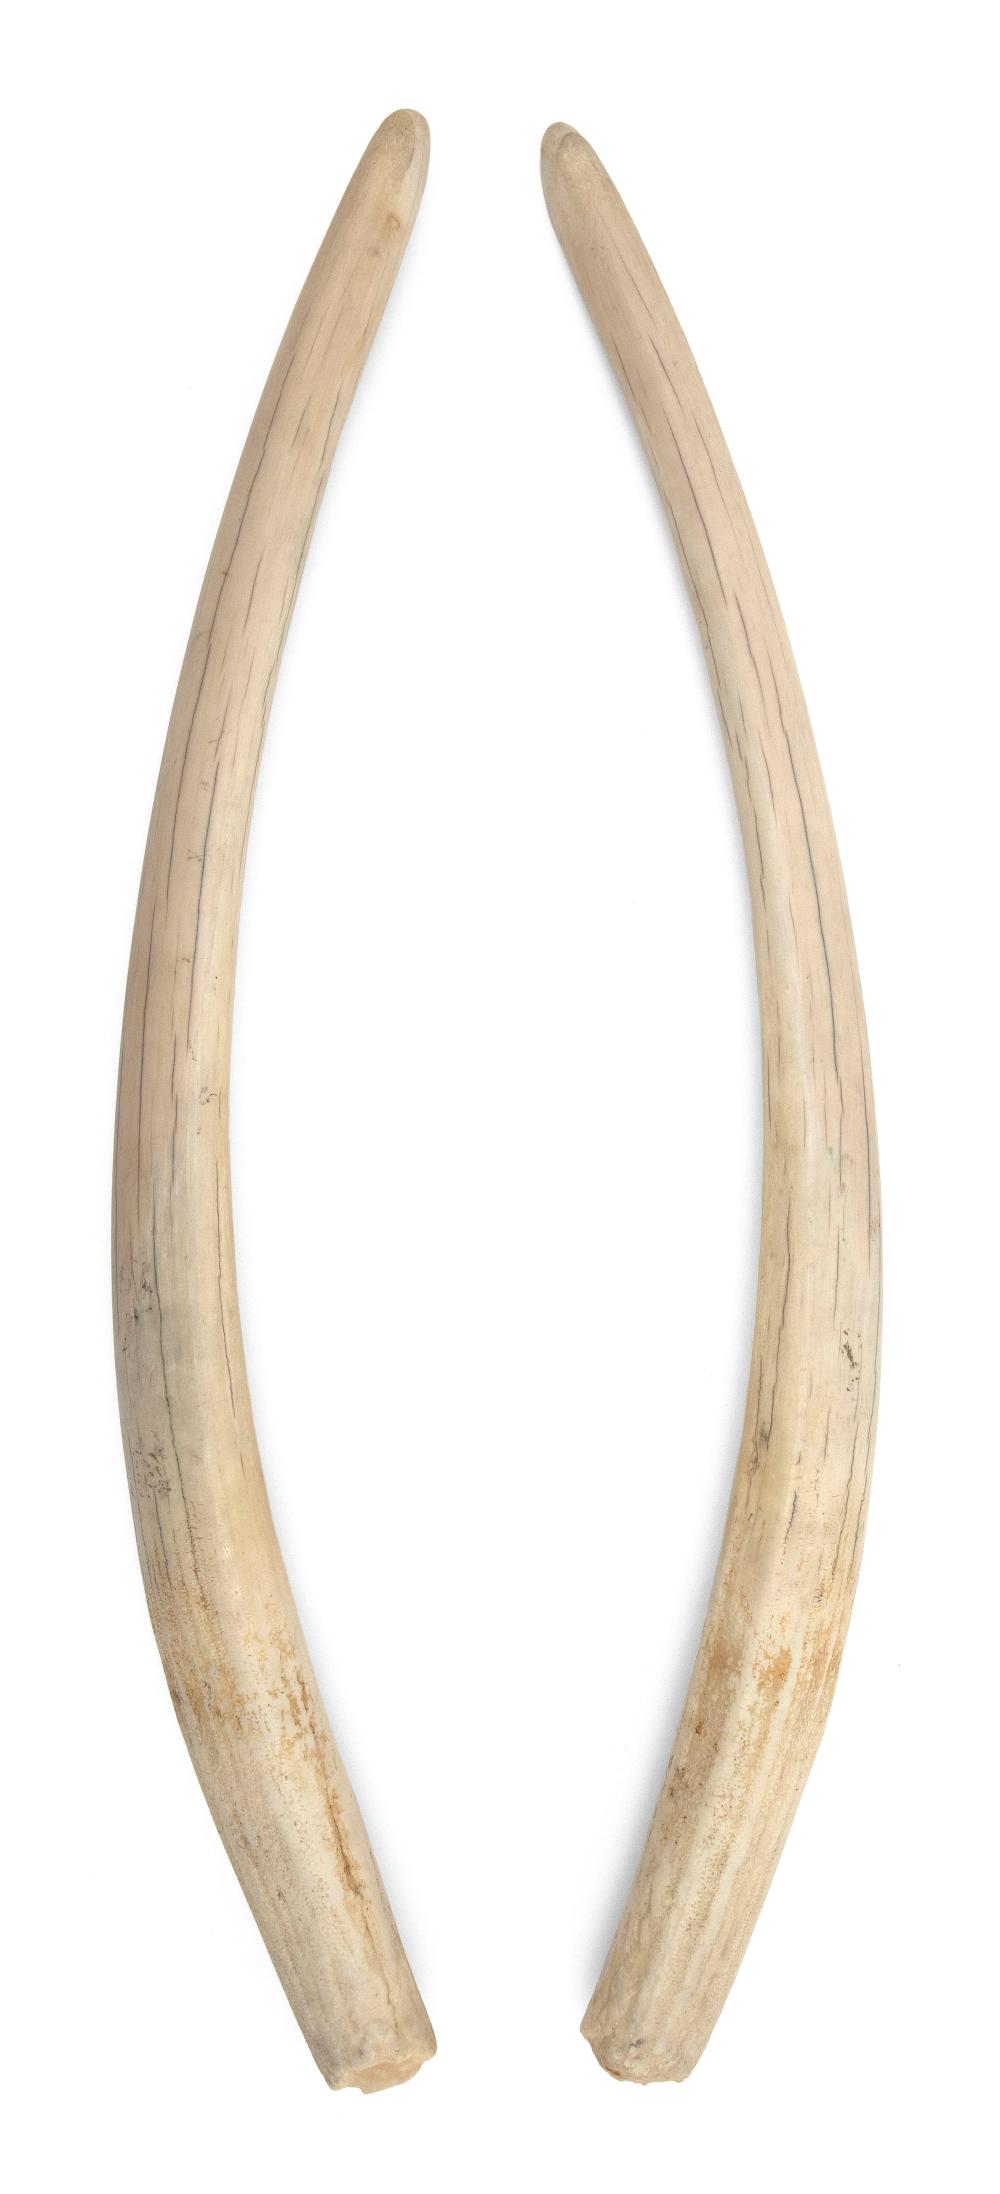 * PAIR OF UNENGRAVED WALRUS TUSKS